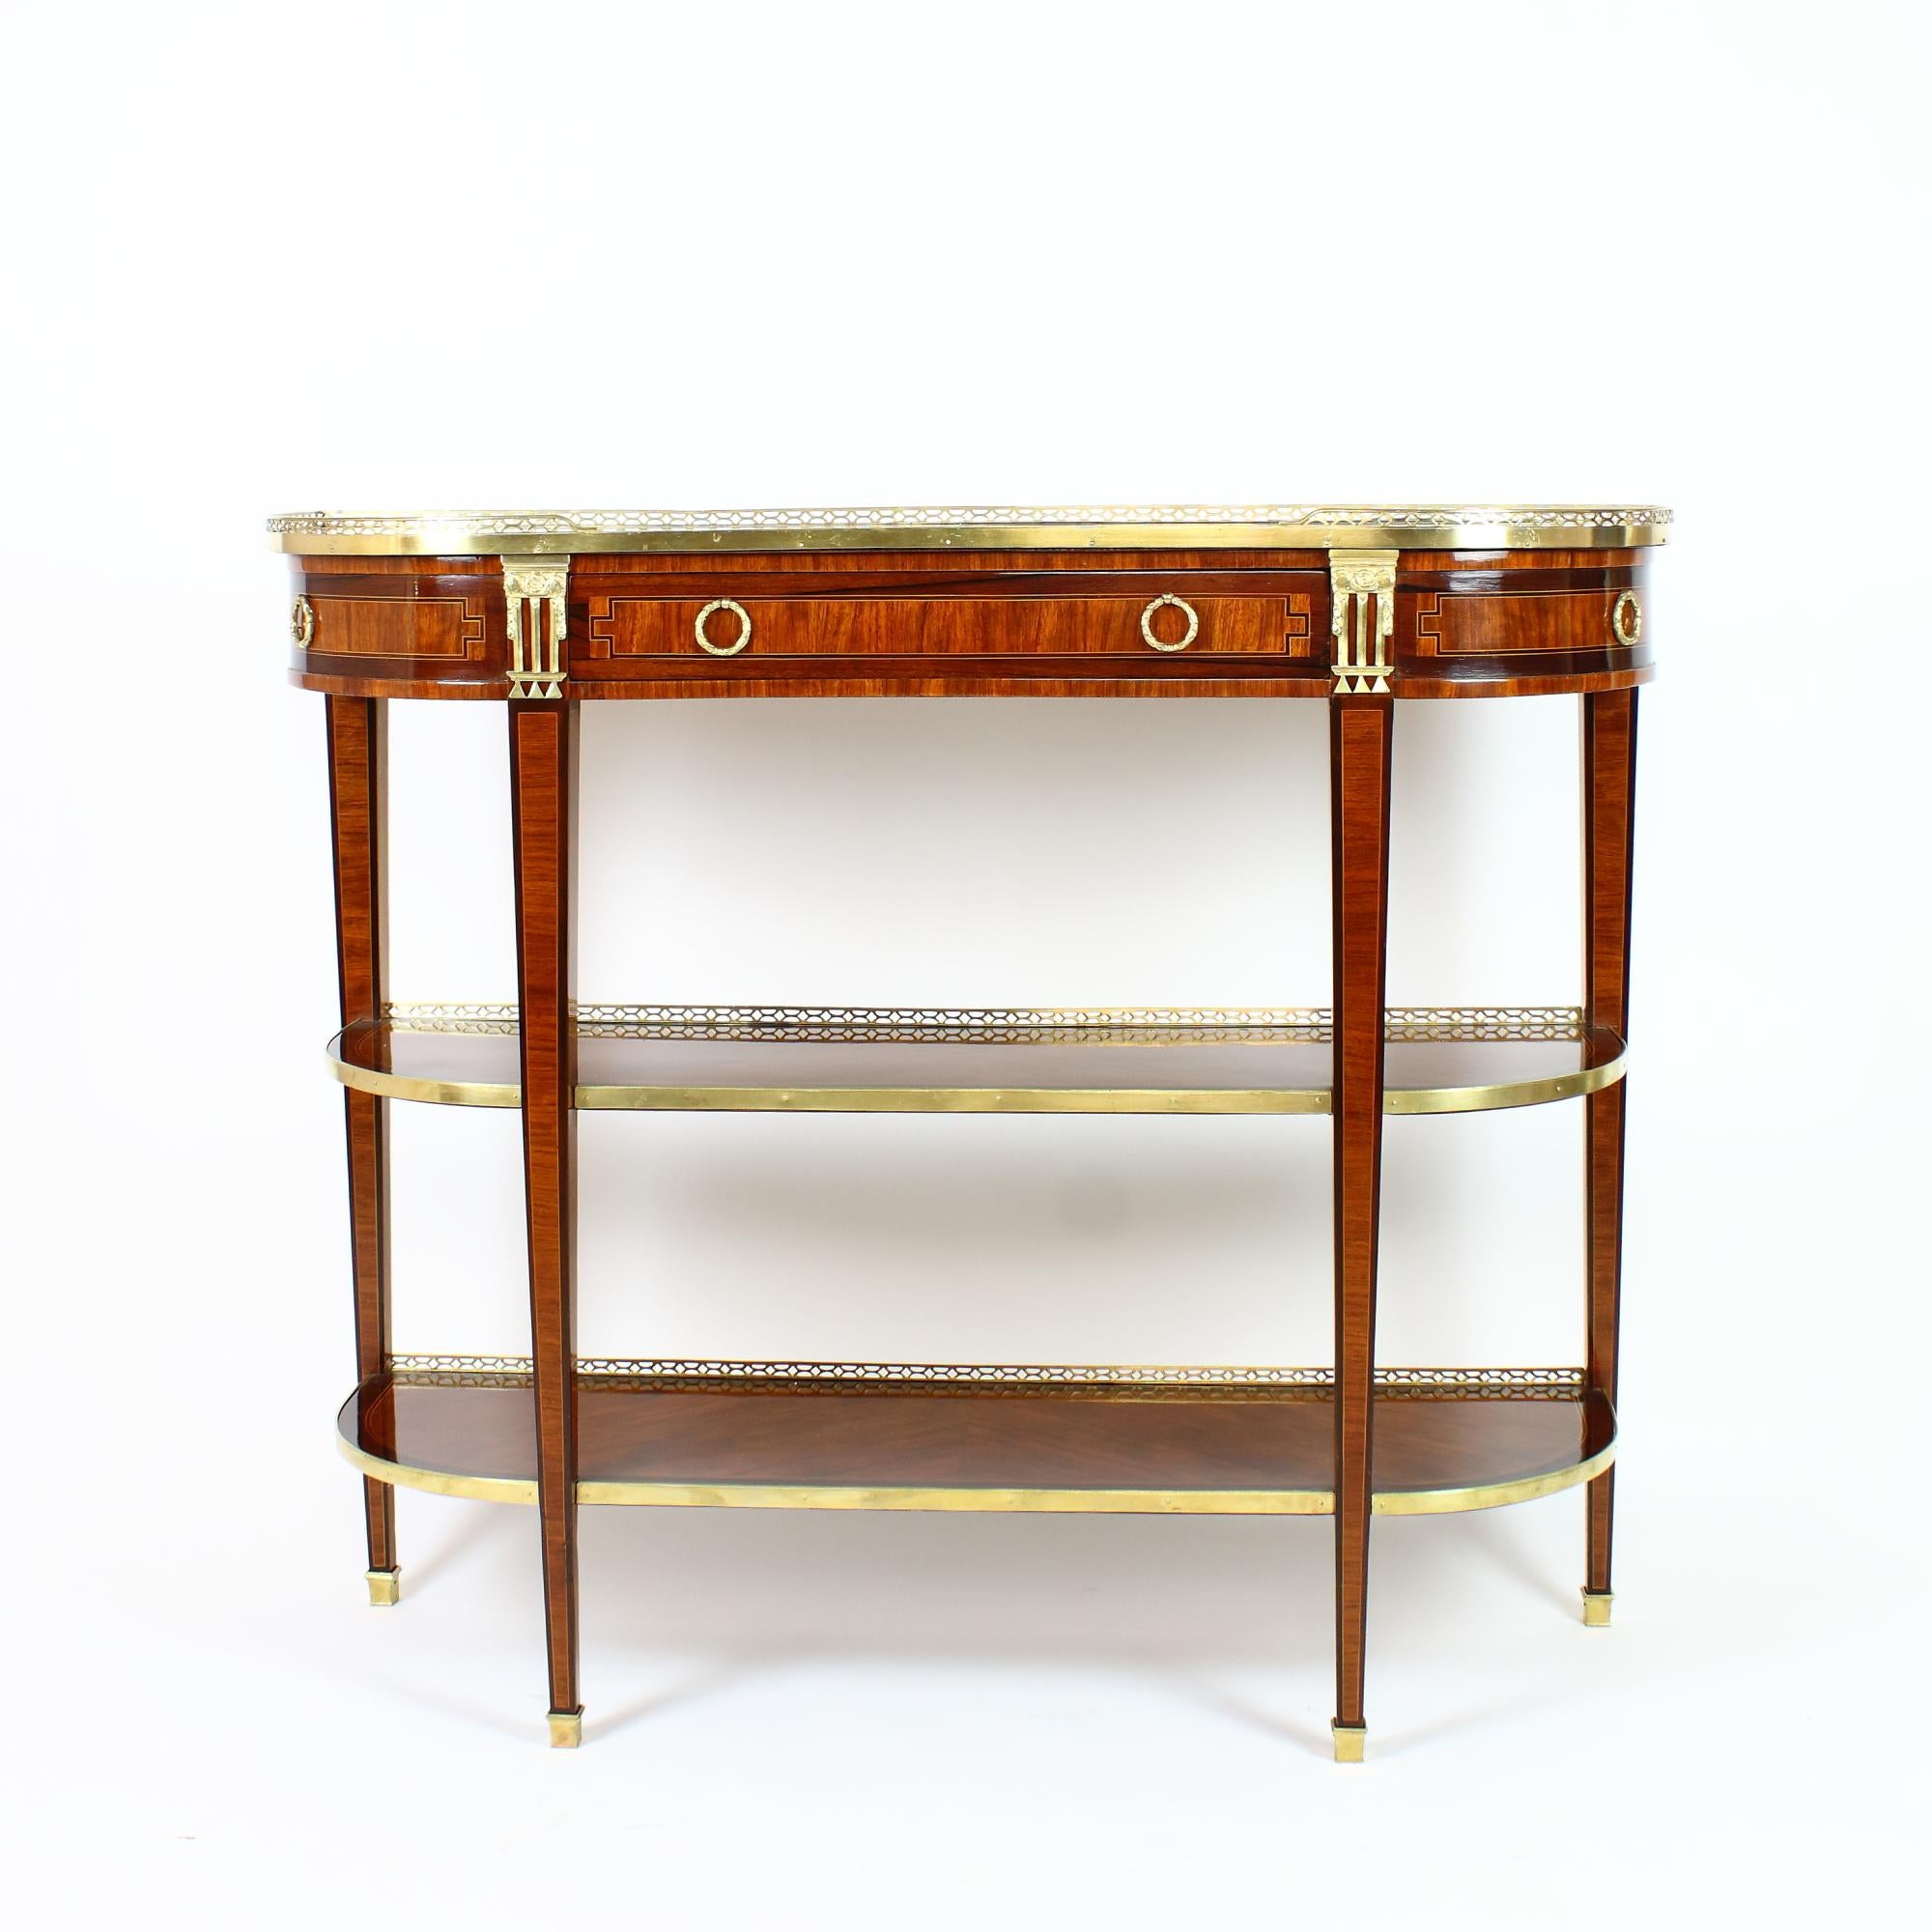 Bronze Late 18th Century French Louis XVI Marquetry Console Table or Desserte